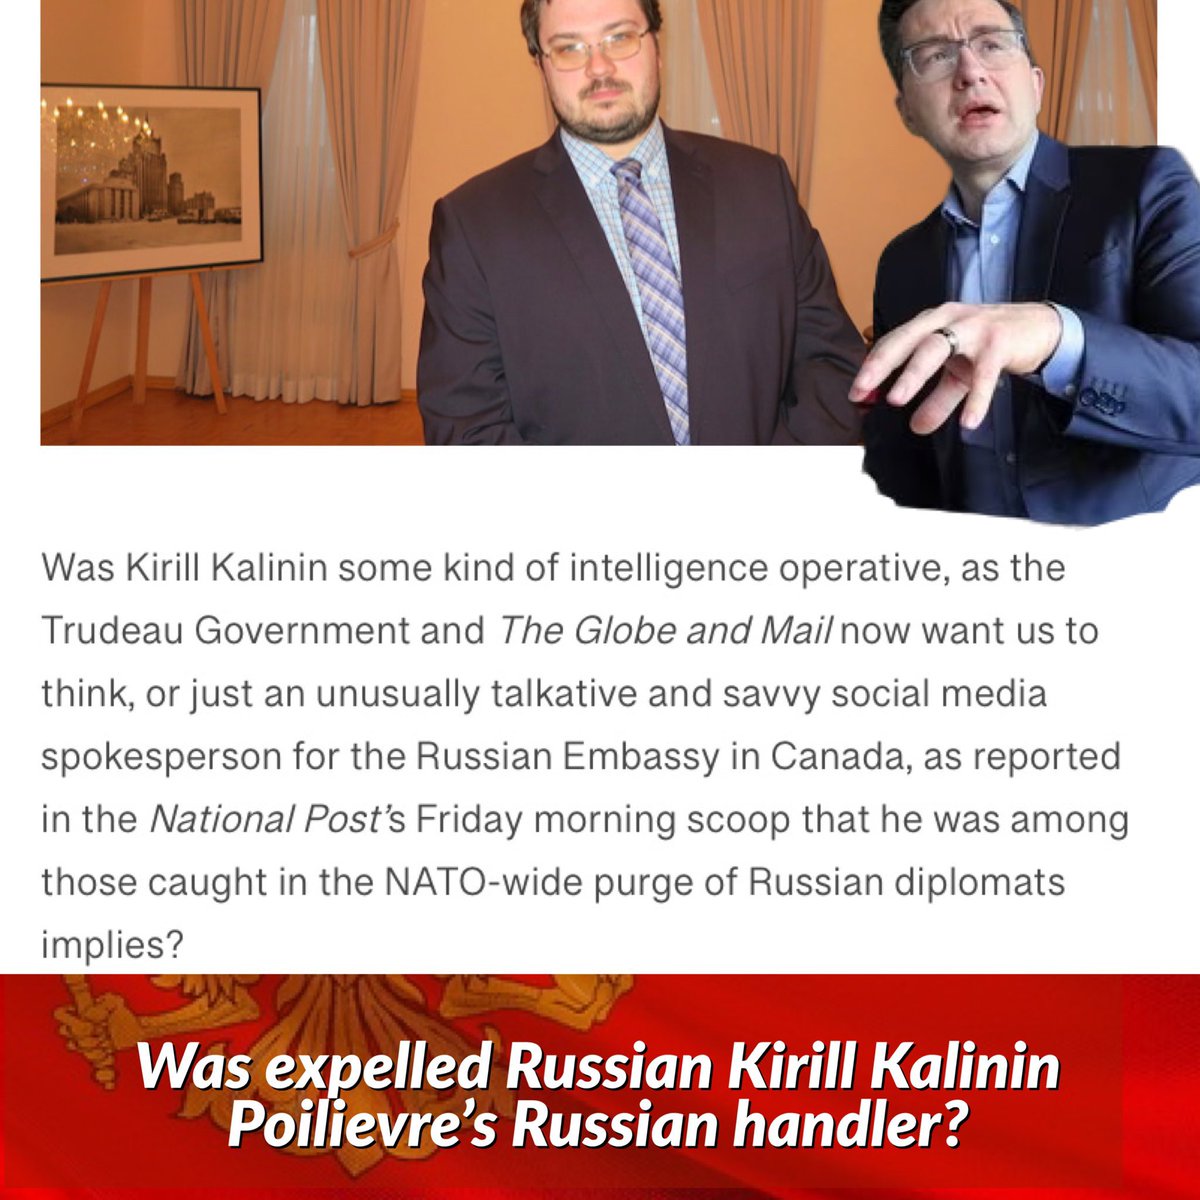 Will Poilievre dare to undergo a polygraph to get Top Secret clearance? 🚩🇷🇺🇷🇺🇷🇺